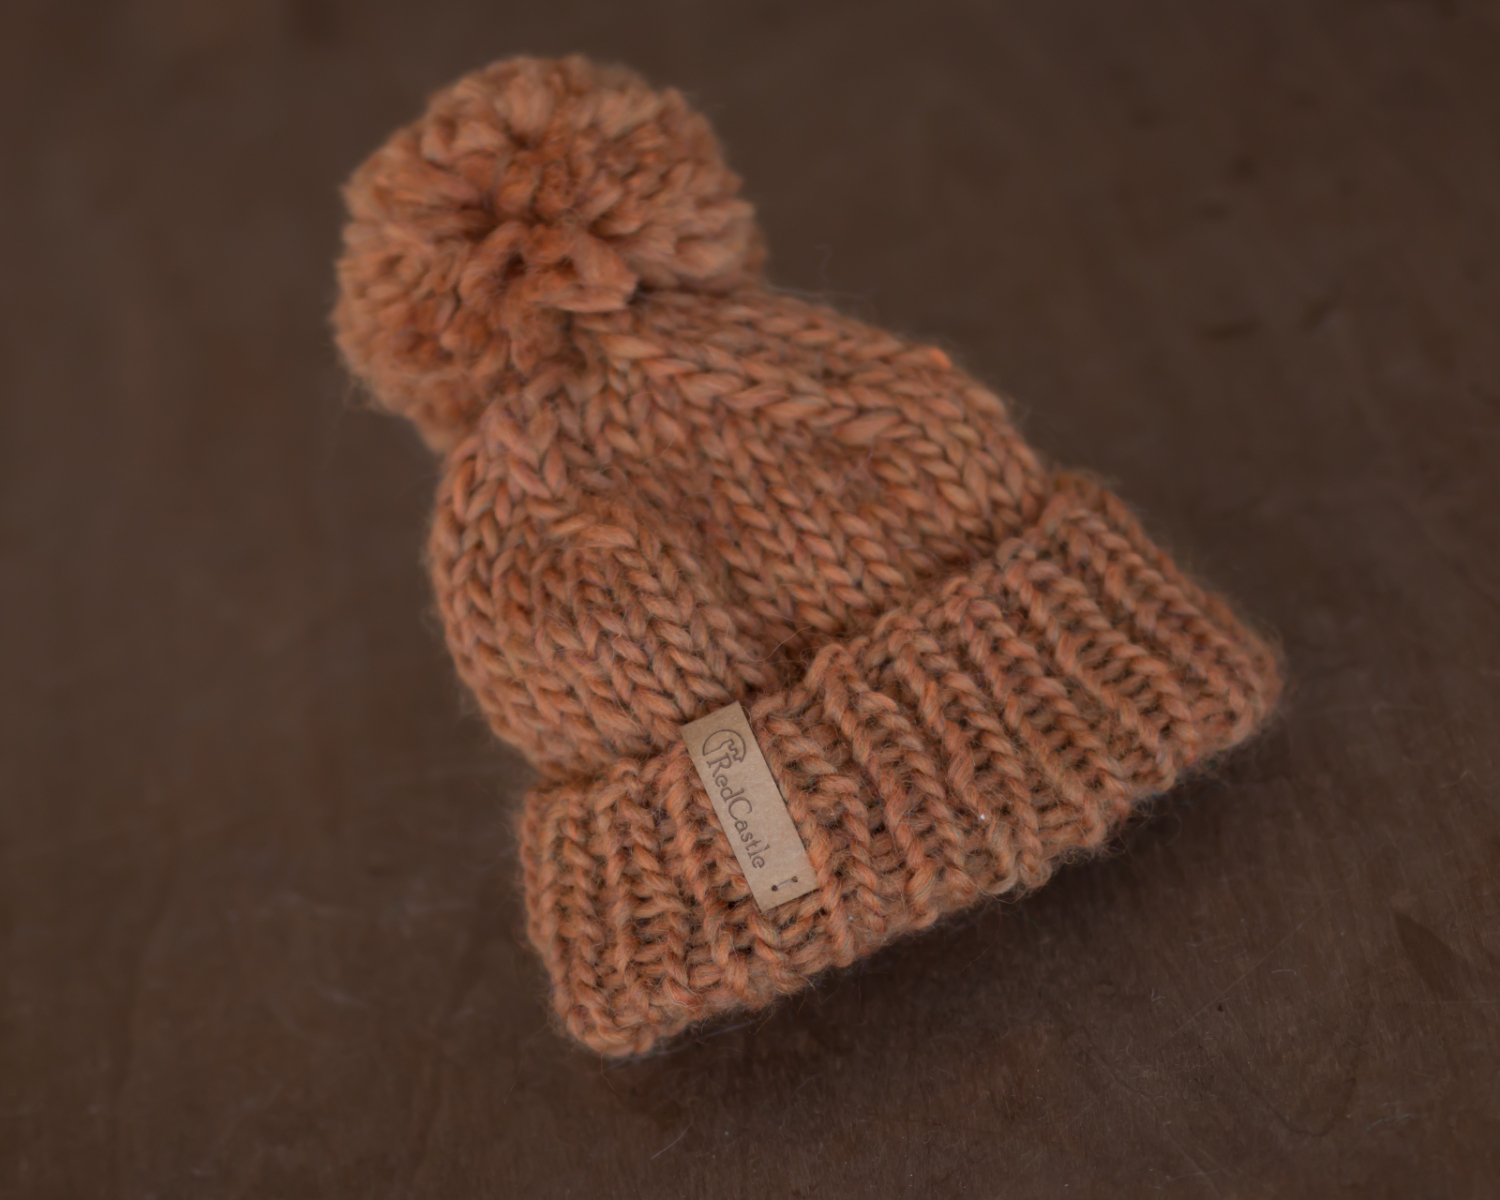 Cinnamon chunky knit hat - 3-6 month - on stock